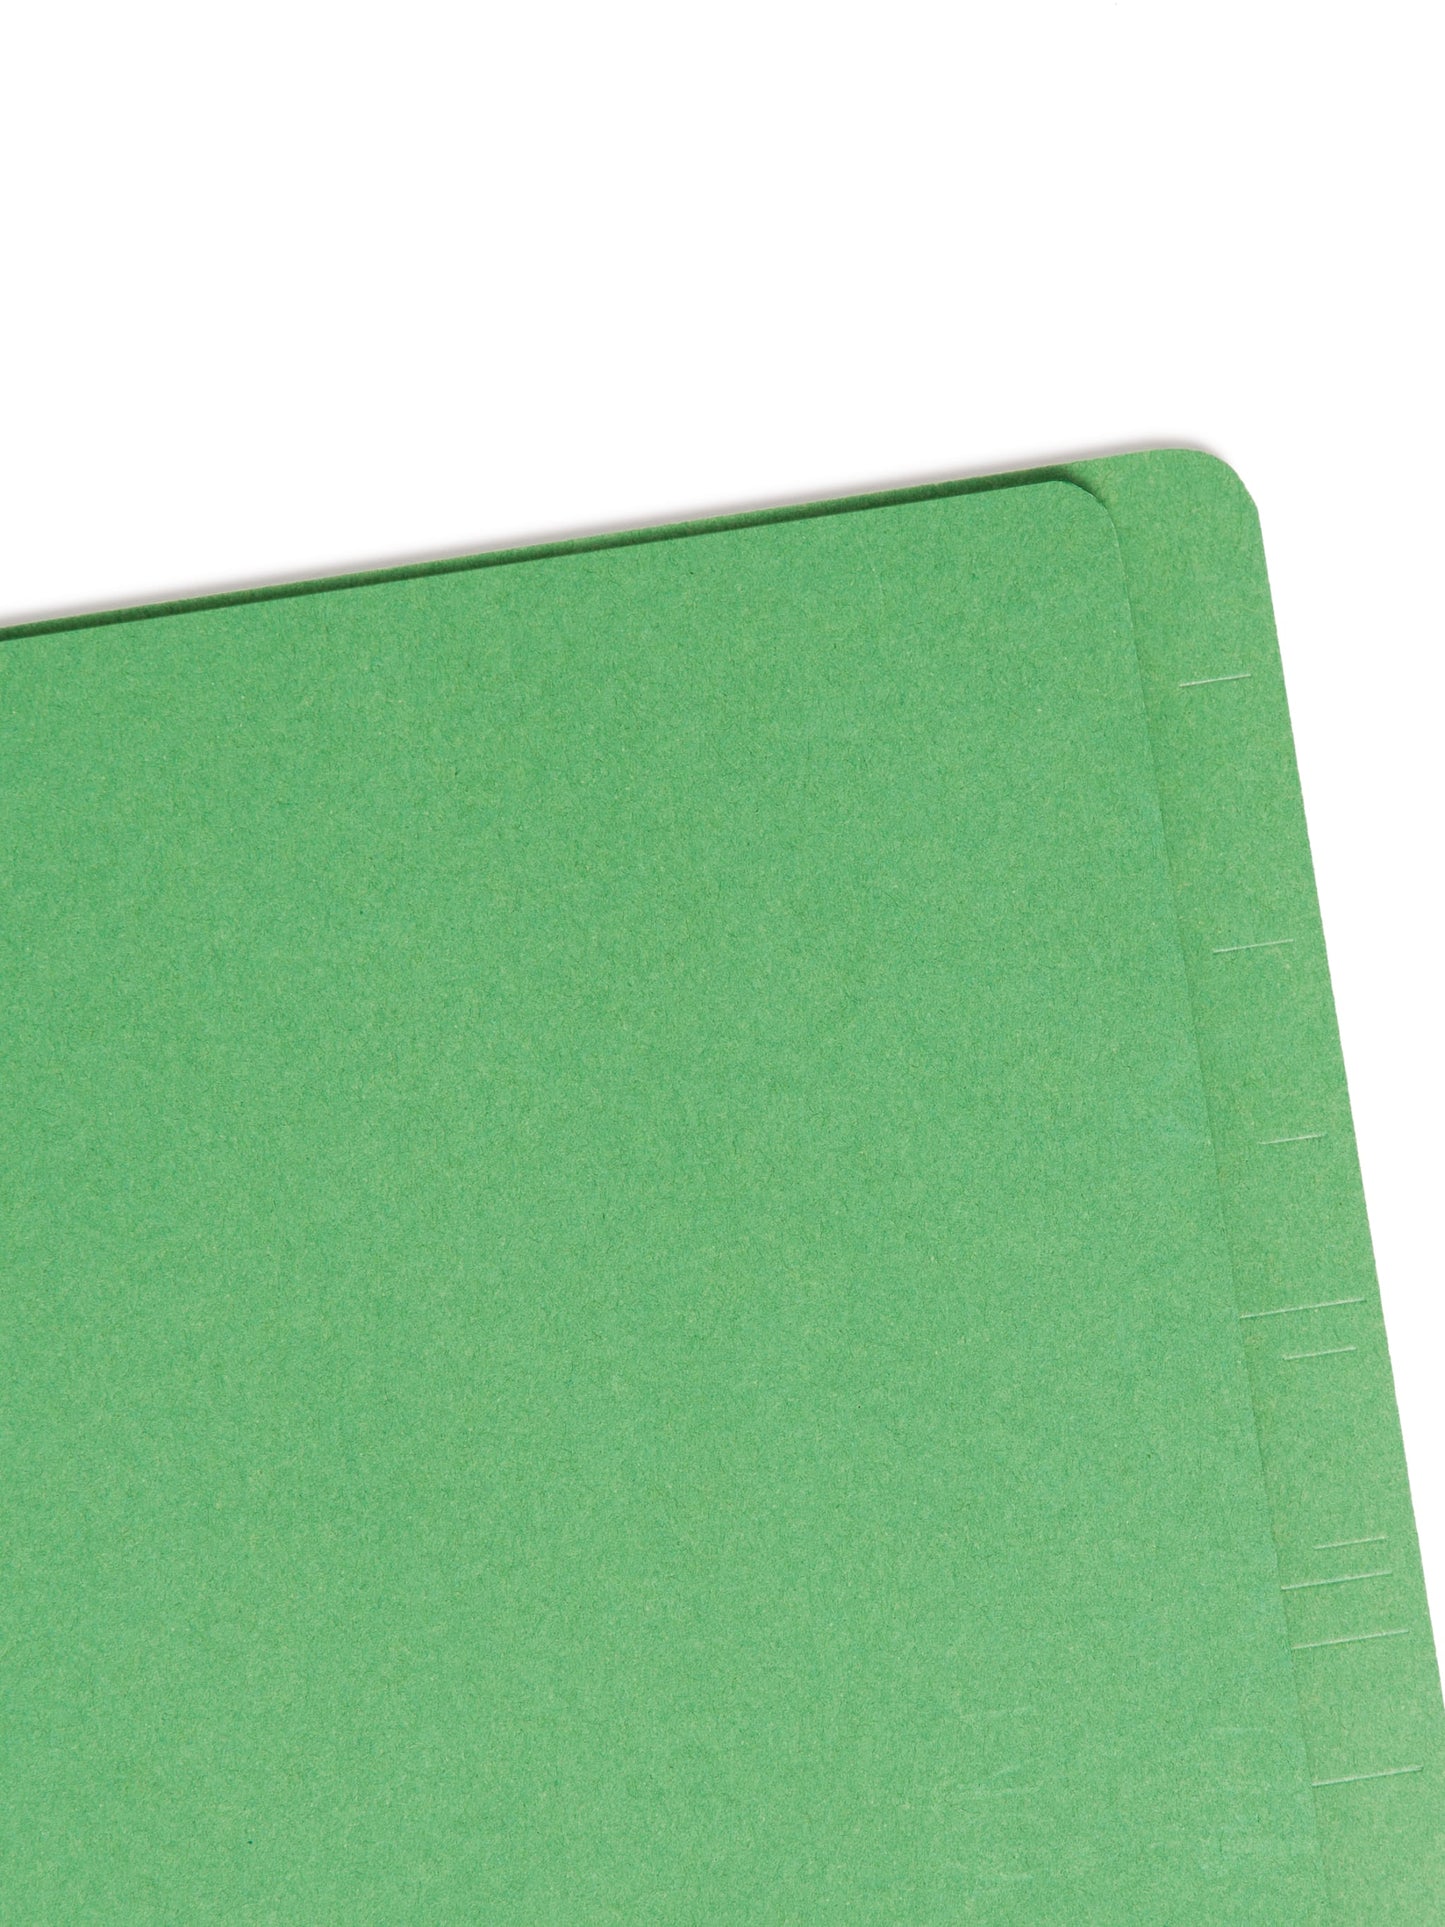 SafeSHIELD® Pressboard End Tab Classification File Folders, Straight-Cut Tab, 2 inch Expansion, 2 Divider, Green Color, Legal Size, Set of 0, 30086486297852